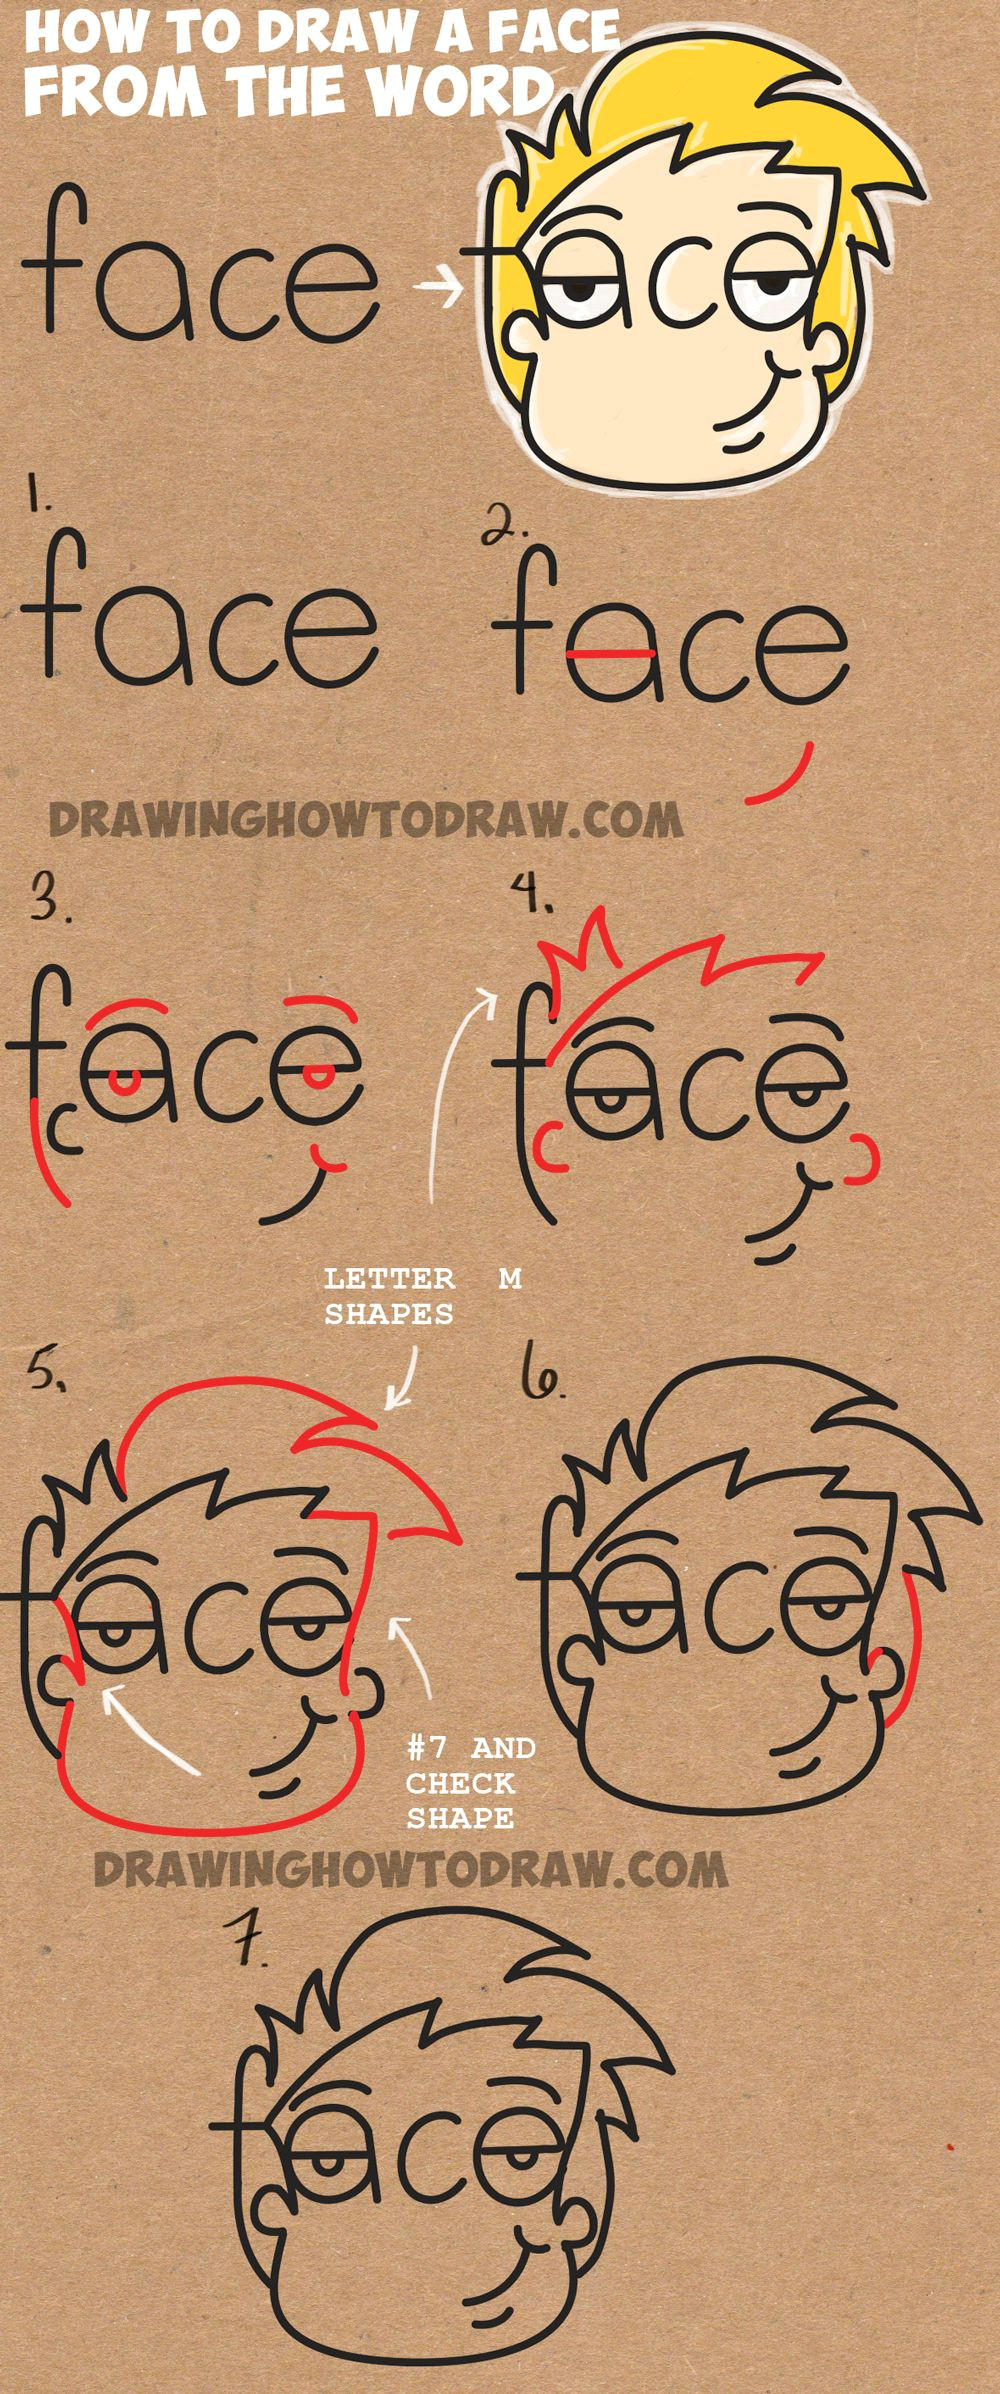 Drawing Cartoons Easy Step Step How to Draw Cartoon Faces From the Word Face Easy Step by Step